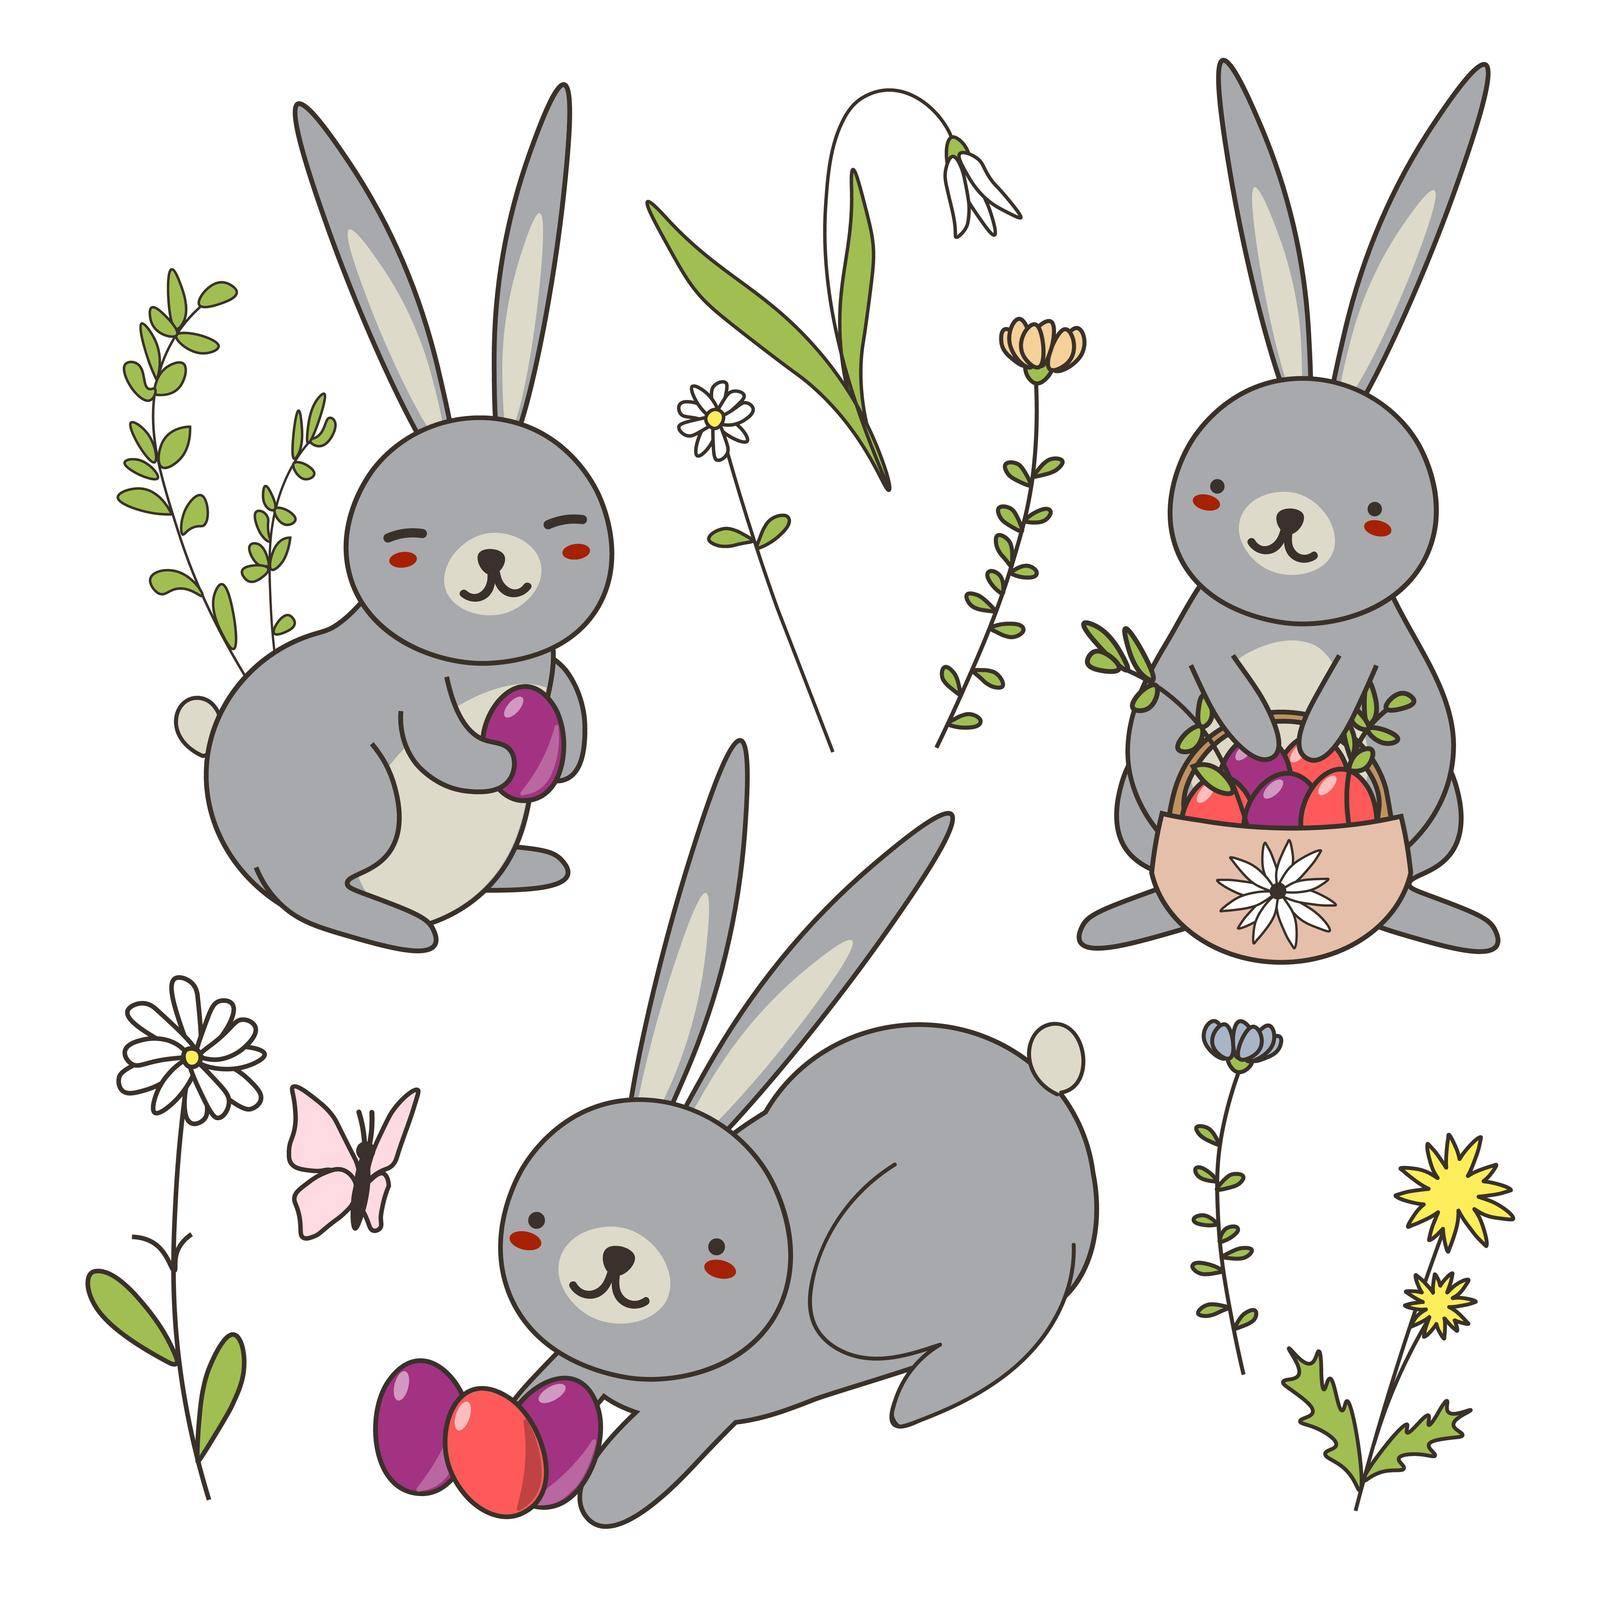 Easter Bunnies with colorful eggs. Vector illustration. Easter collection isolated elements for design and lettering.